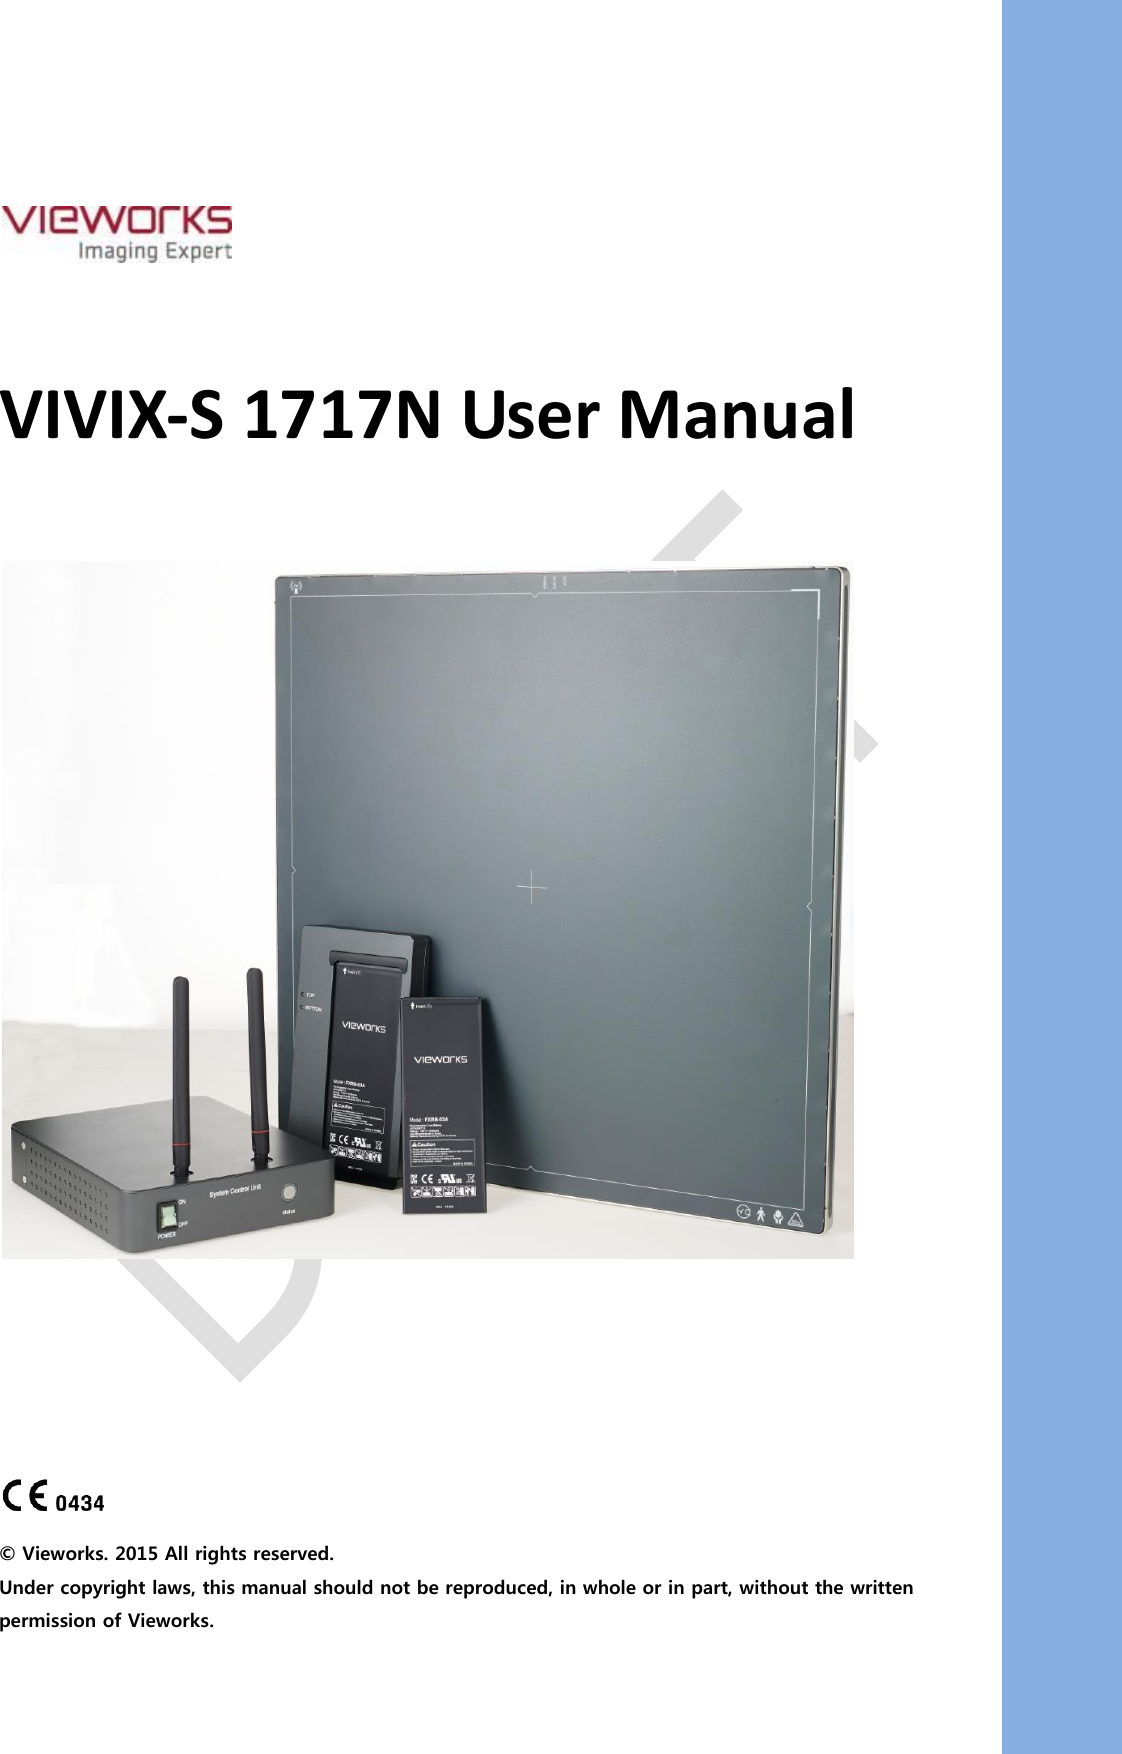      VIVIX-S 1717N User Manual             © Vieworks. 2015 All rights reserved. Under copyright laws, this manual should not be reproduced, in whole or in part, without the written permission of Vieworks. 